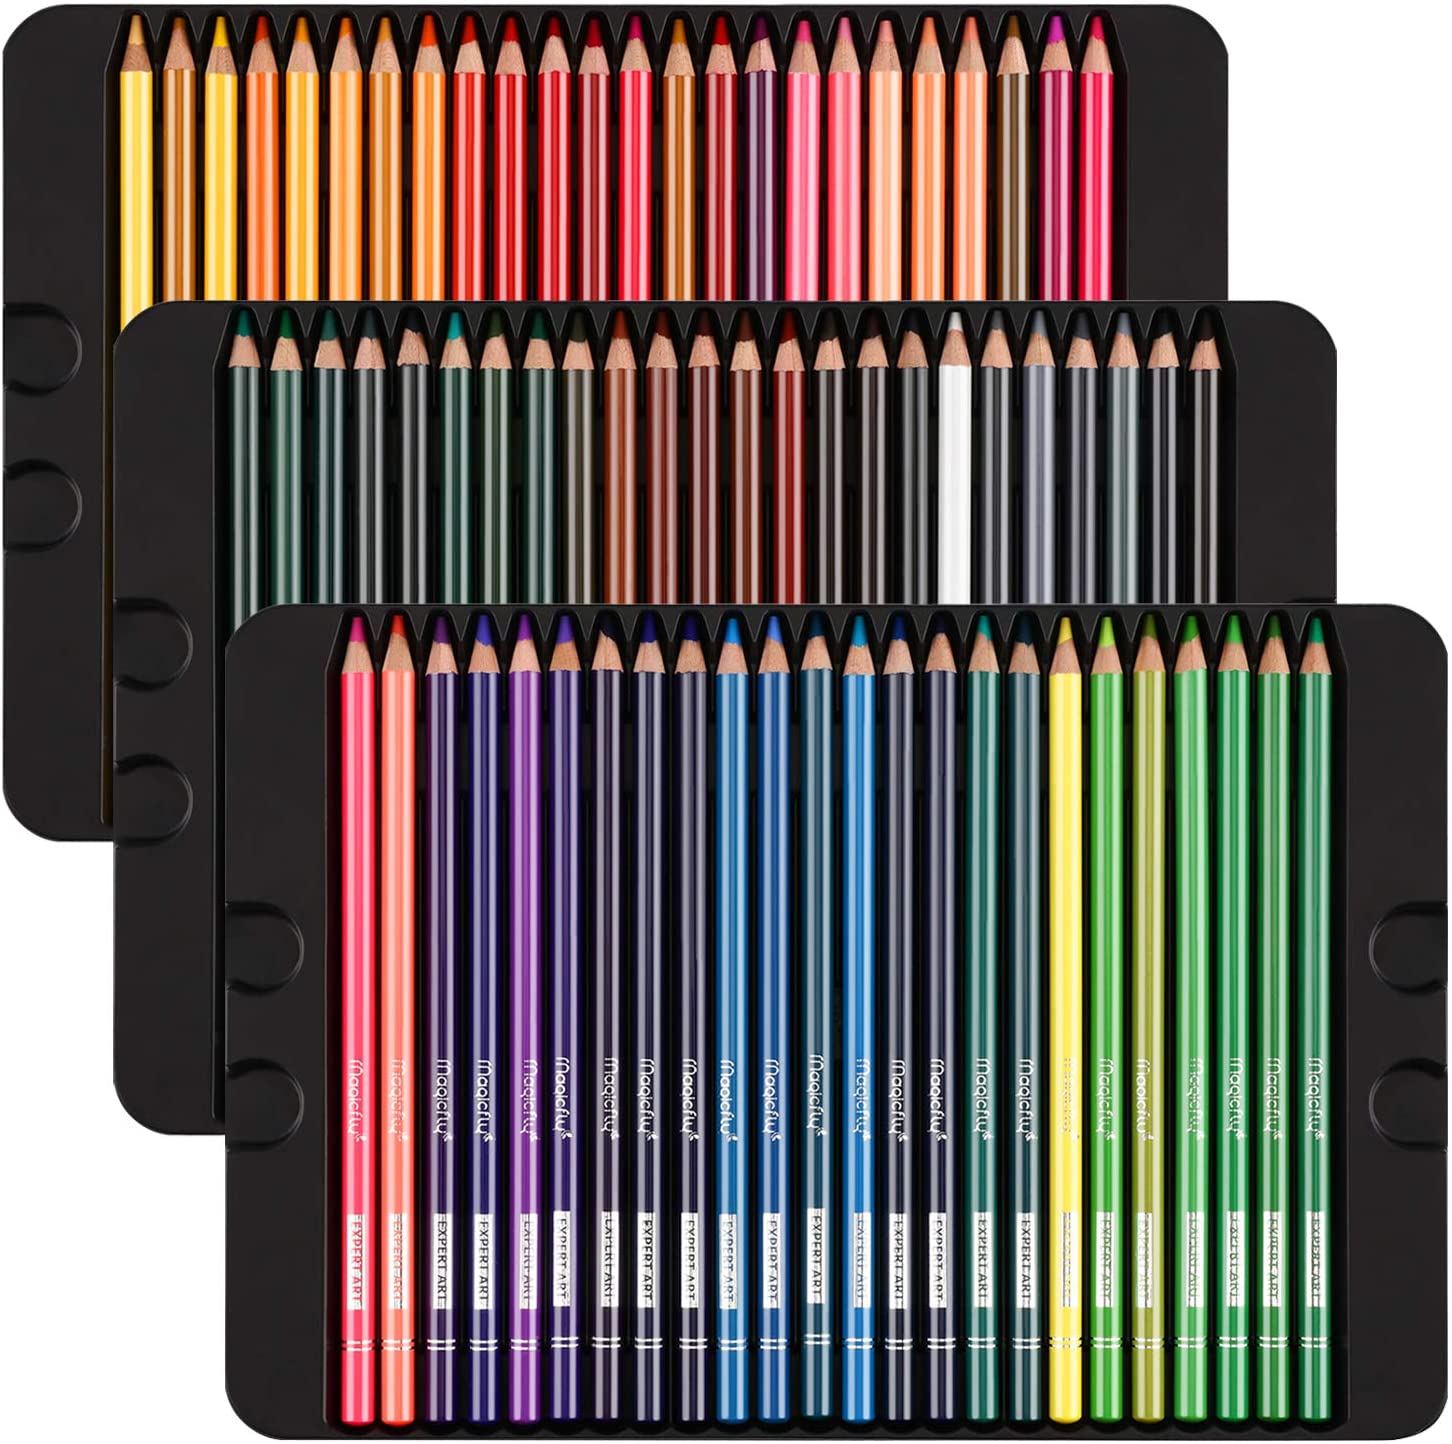 Magicfly 72 Colored Pencils Set, Oil-Based Colored Pencils for Adults, Artists, Art Colored Pencils for Coloring Books, Drawing Arts & Sketching